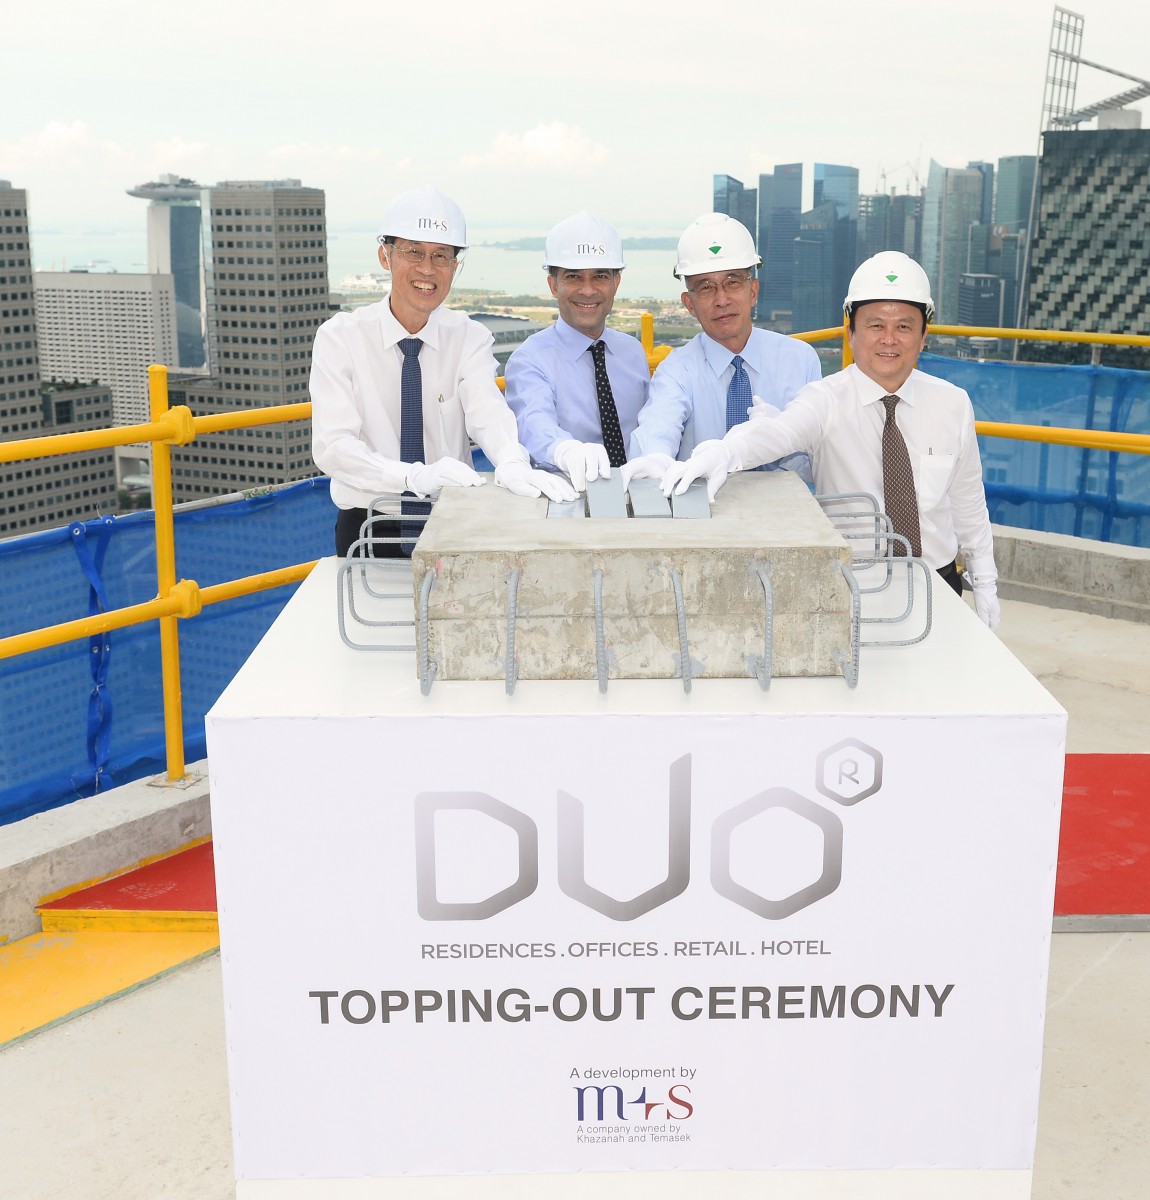 Topping-out ceremony